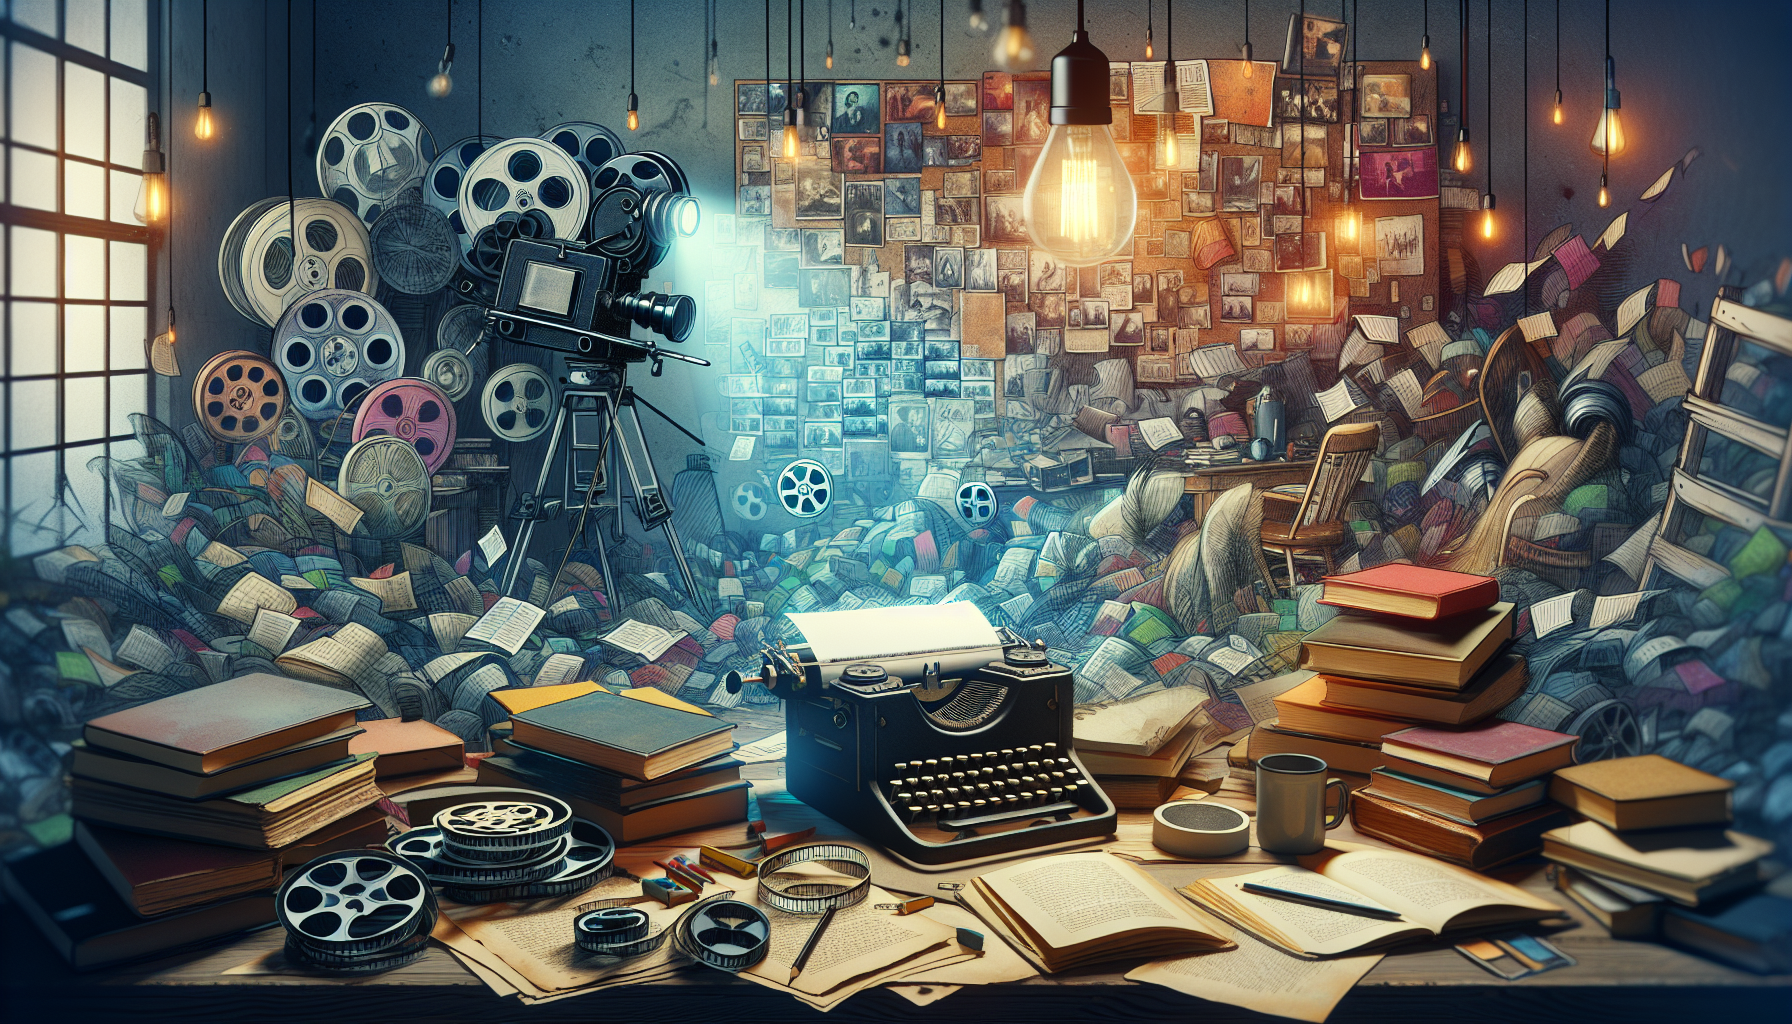 An imaginative artist's studio filled with scattered books, film reels, a vintage typewriter, and a screenplay laid out on a desk, all beneath a hanging light bulb illuminating the creative chaos. In